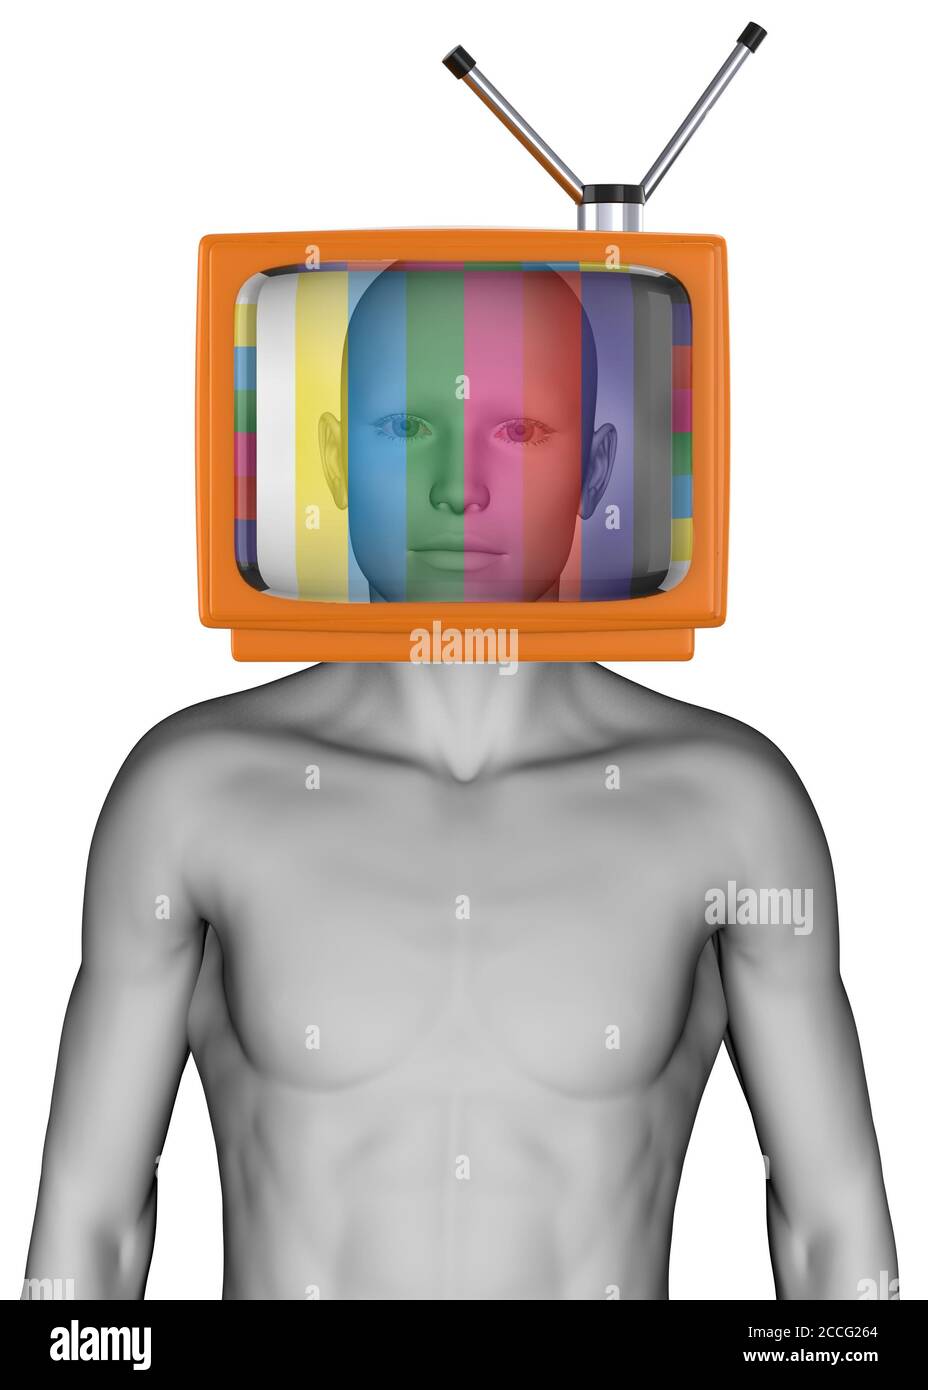 Mass Media influence our thoughts - 3D Concept Stock Photo